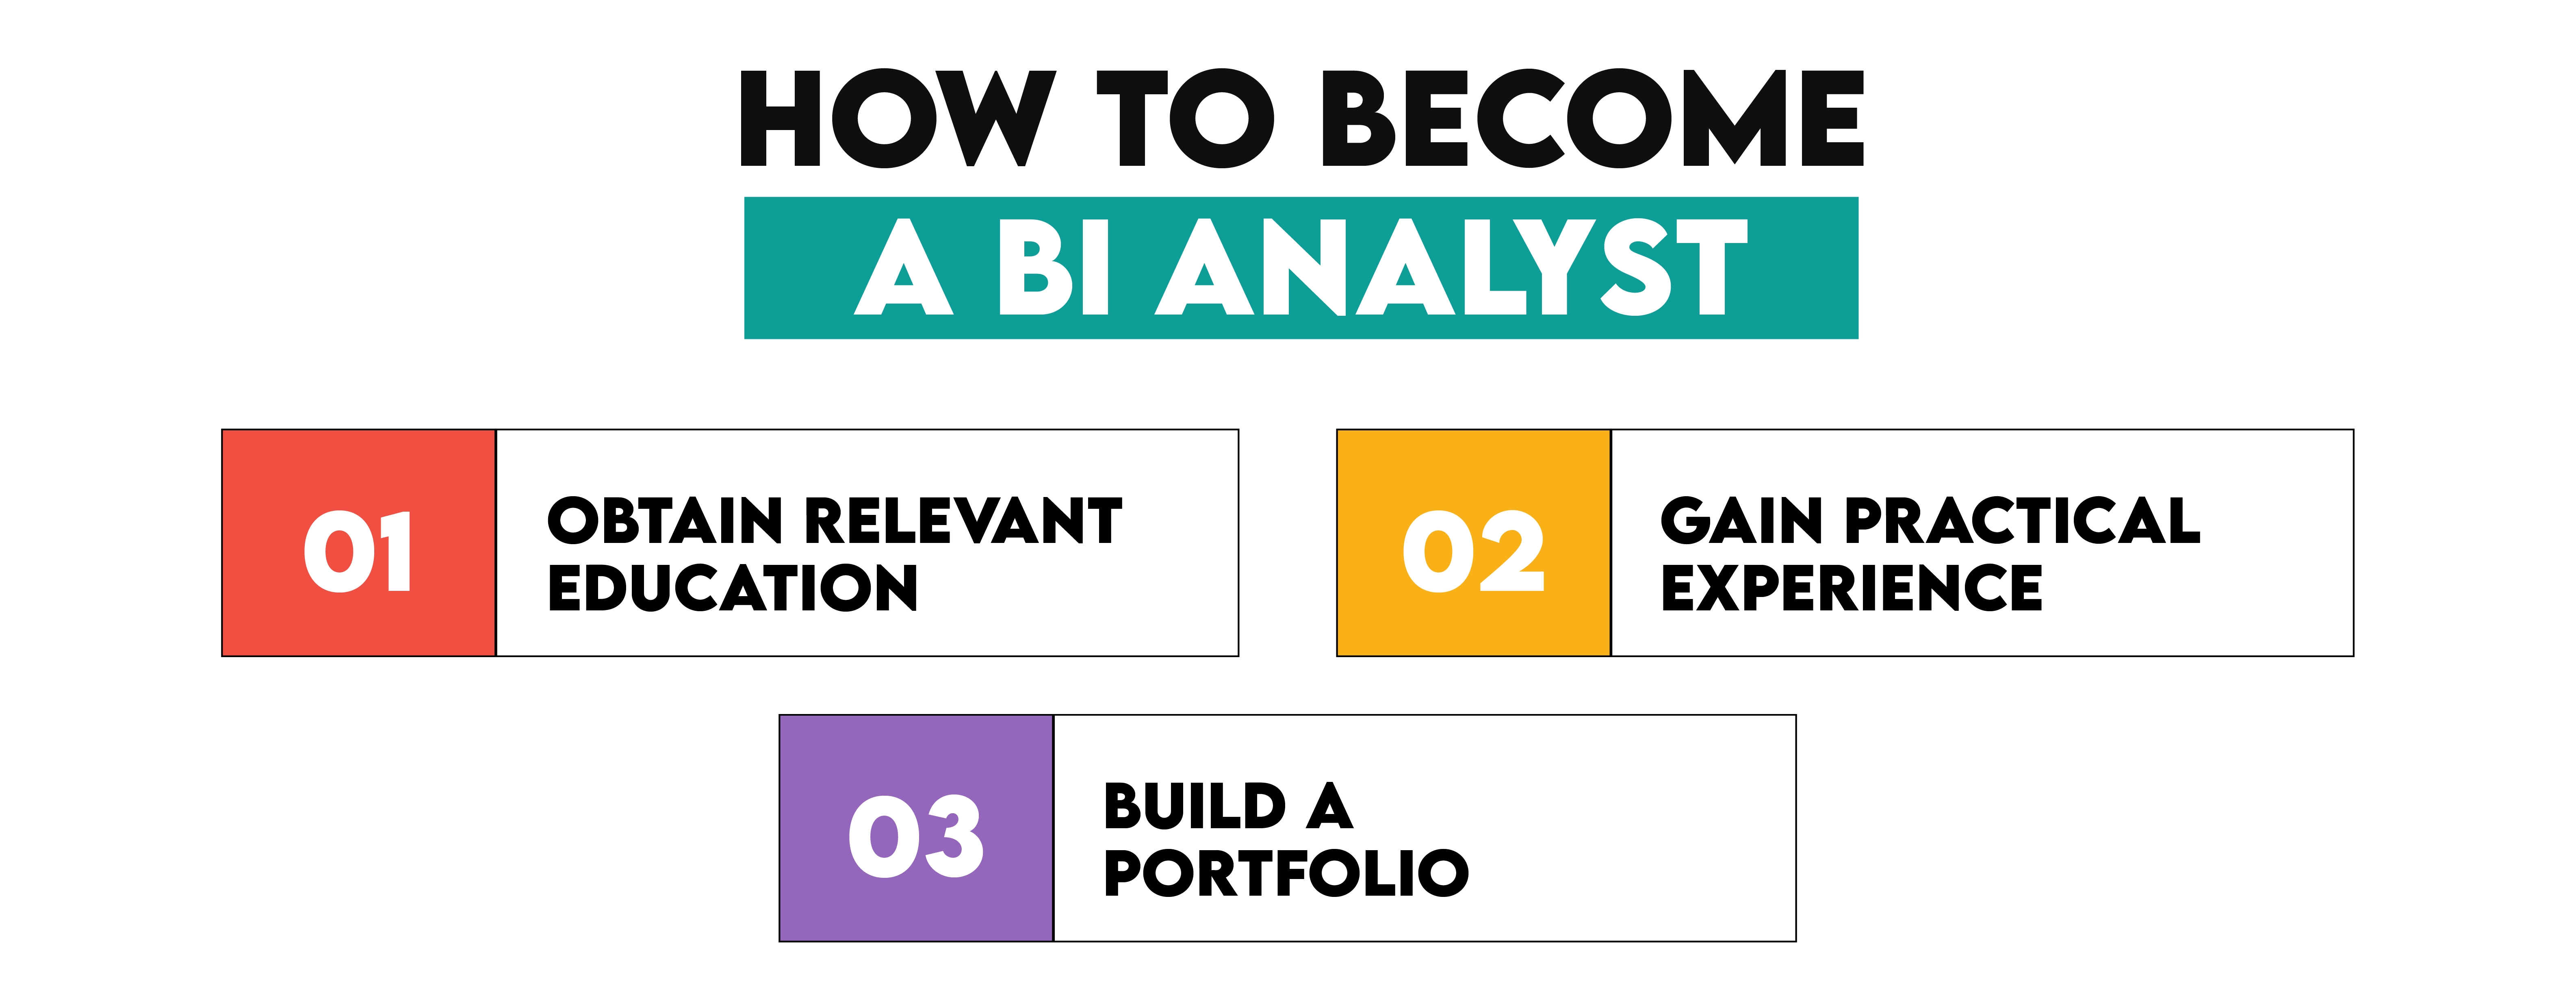 How to Become a Business Intelligence Analyst